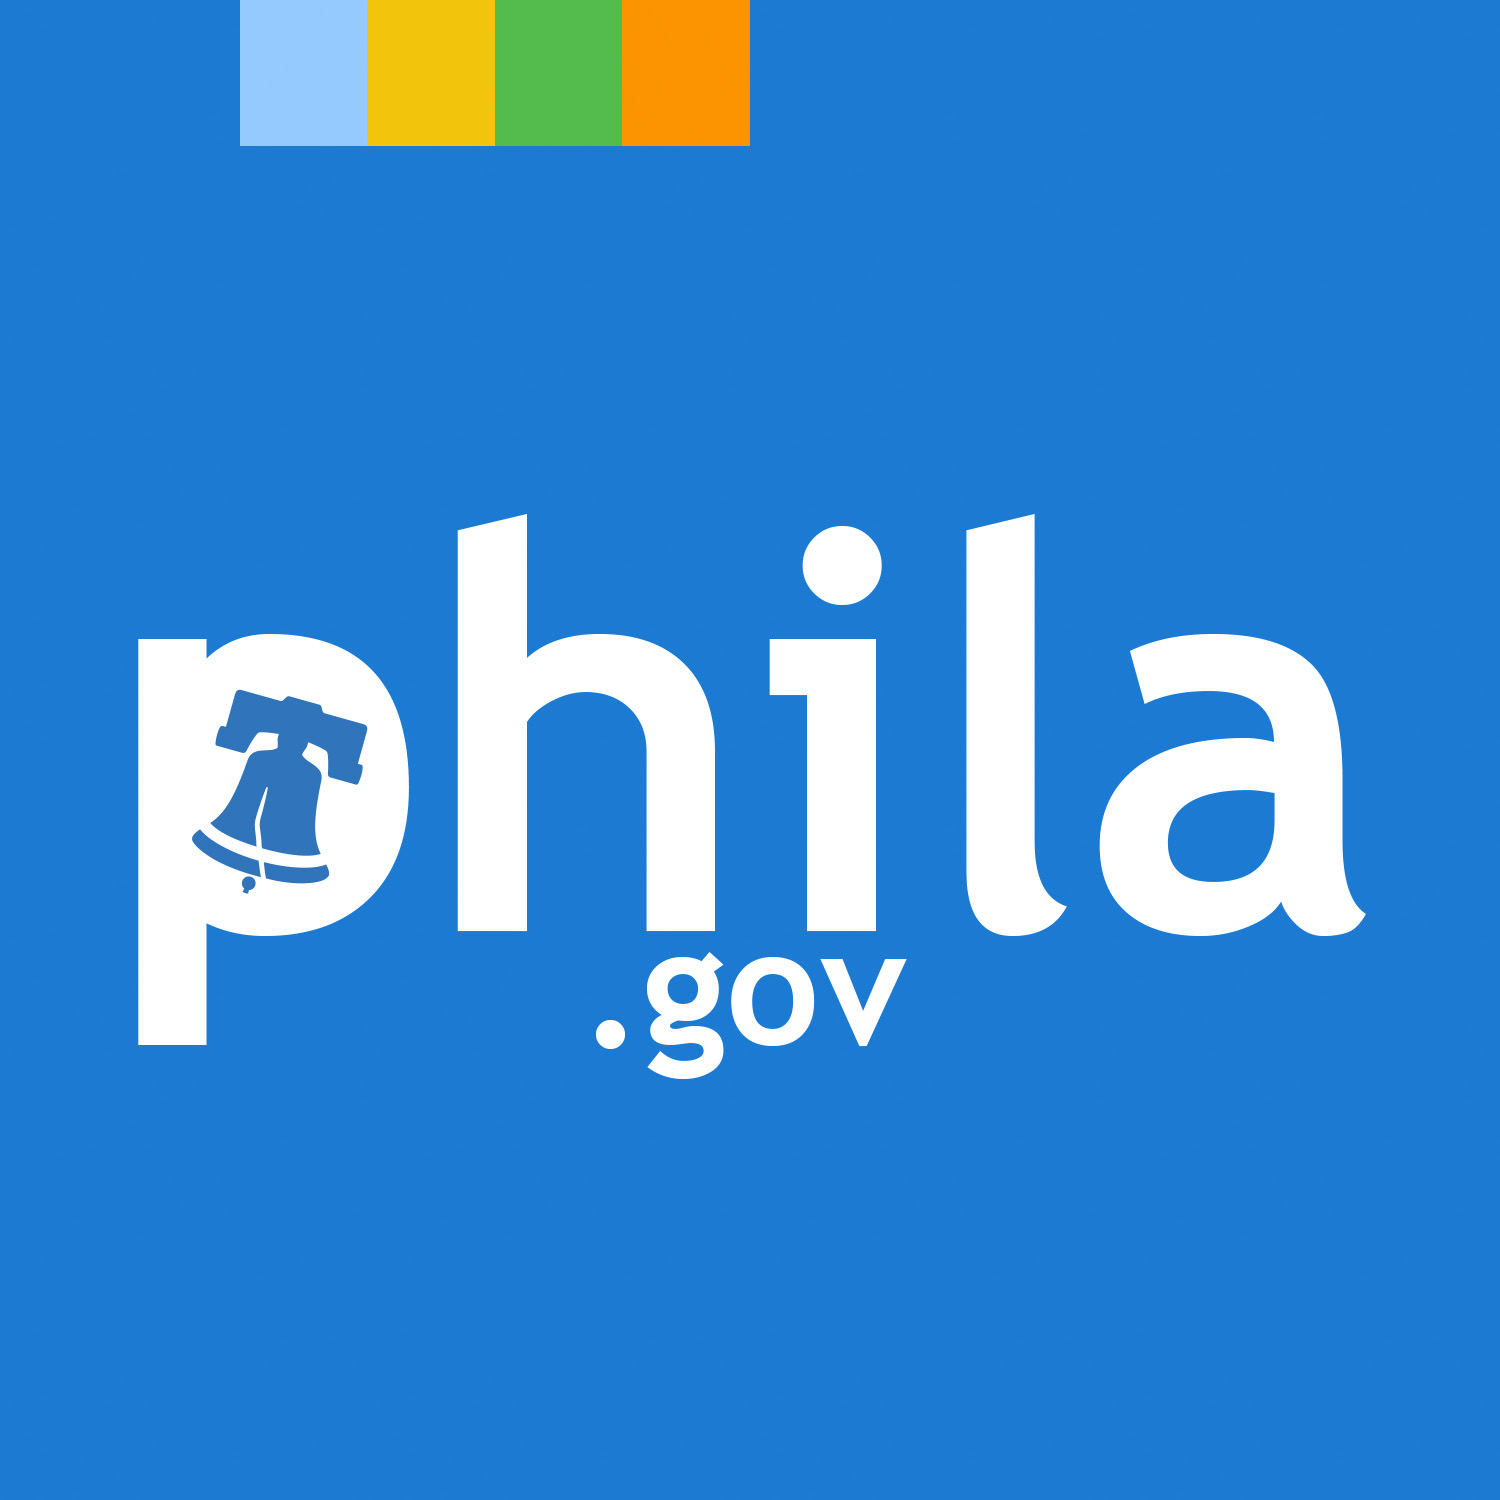 Philly Picks Phlush in City s Public Restroom Naming Poll